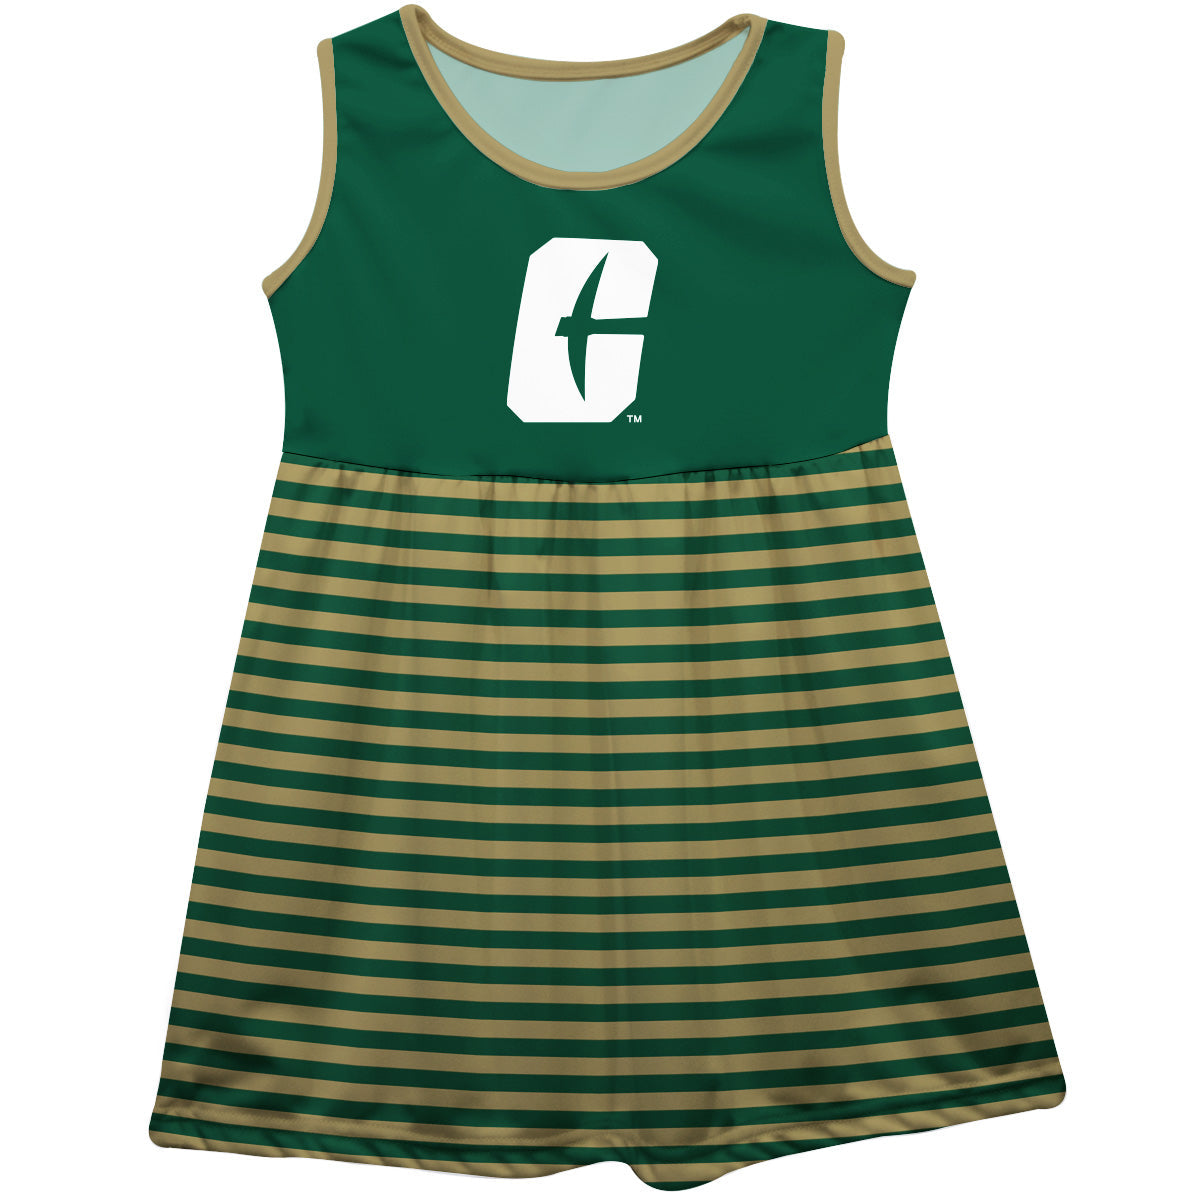 UNC Charlotte 49ers Girls Game Day Sleeveless Tank Dress Solid Green Logo Stripes on Skirt by Vive La Fete-Campus-Wardrobe